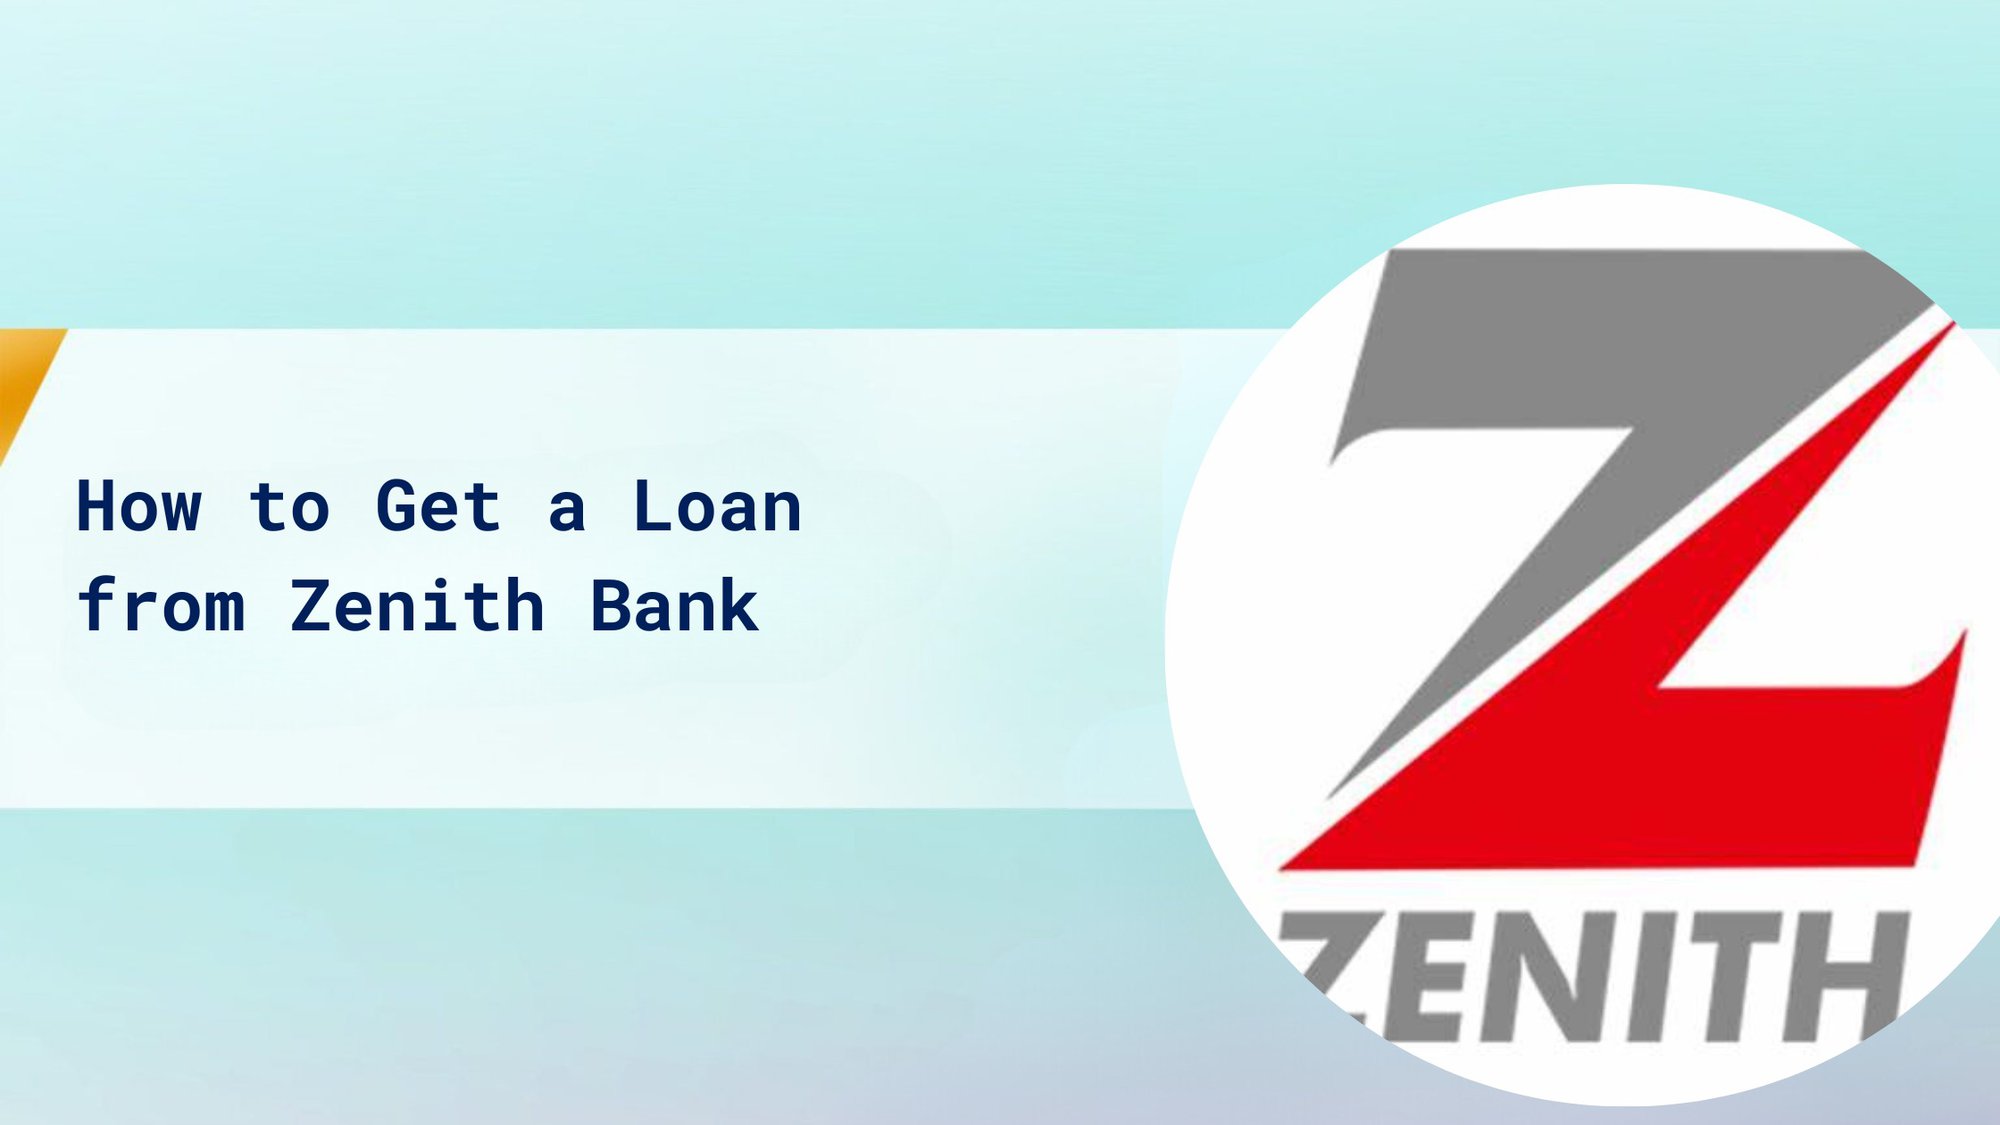 How to Get a Loan from Zenith Bank cover